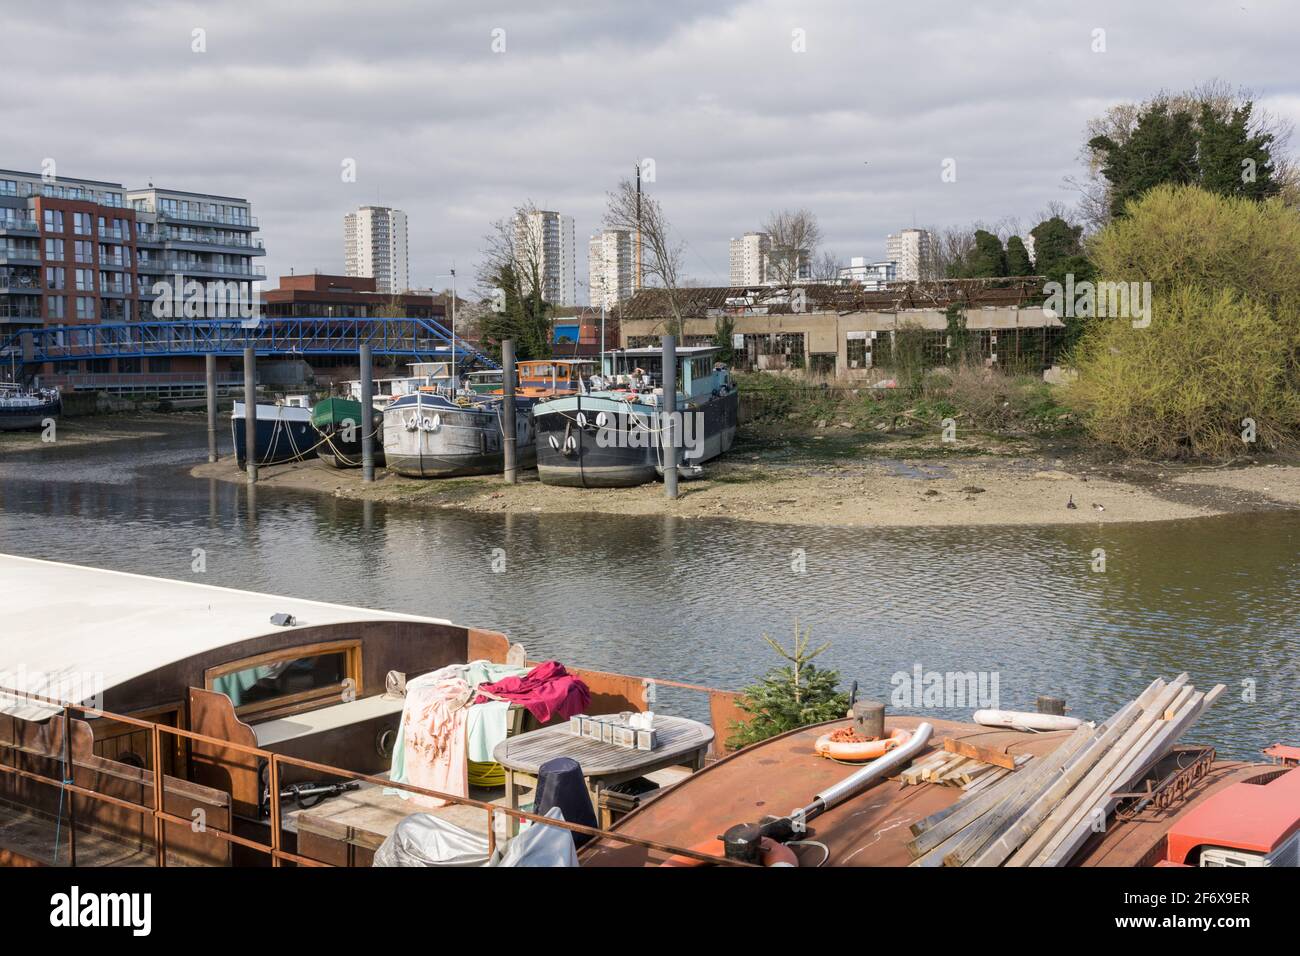 John’s Boat Works Ltd- colourful houseboats being repaired on Lot's Ait on the River Thames opposite the Waterman's Arts Centre, Brentford, London, UK Stock Photo